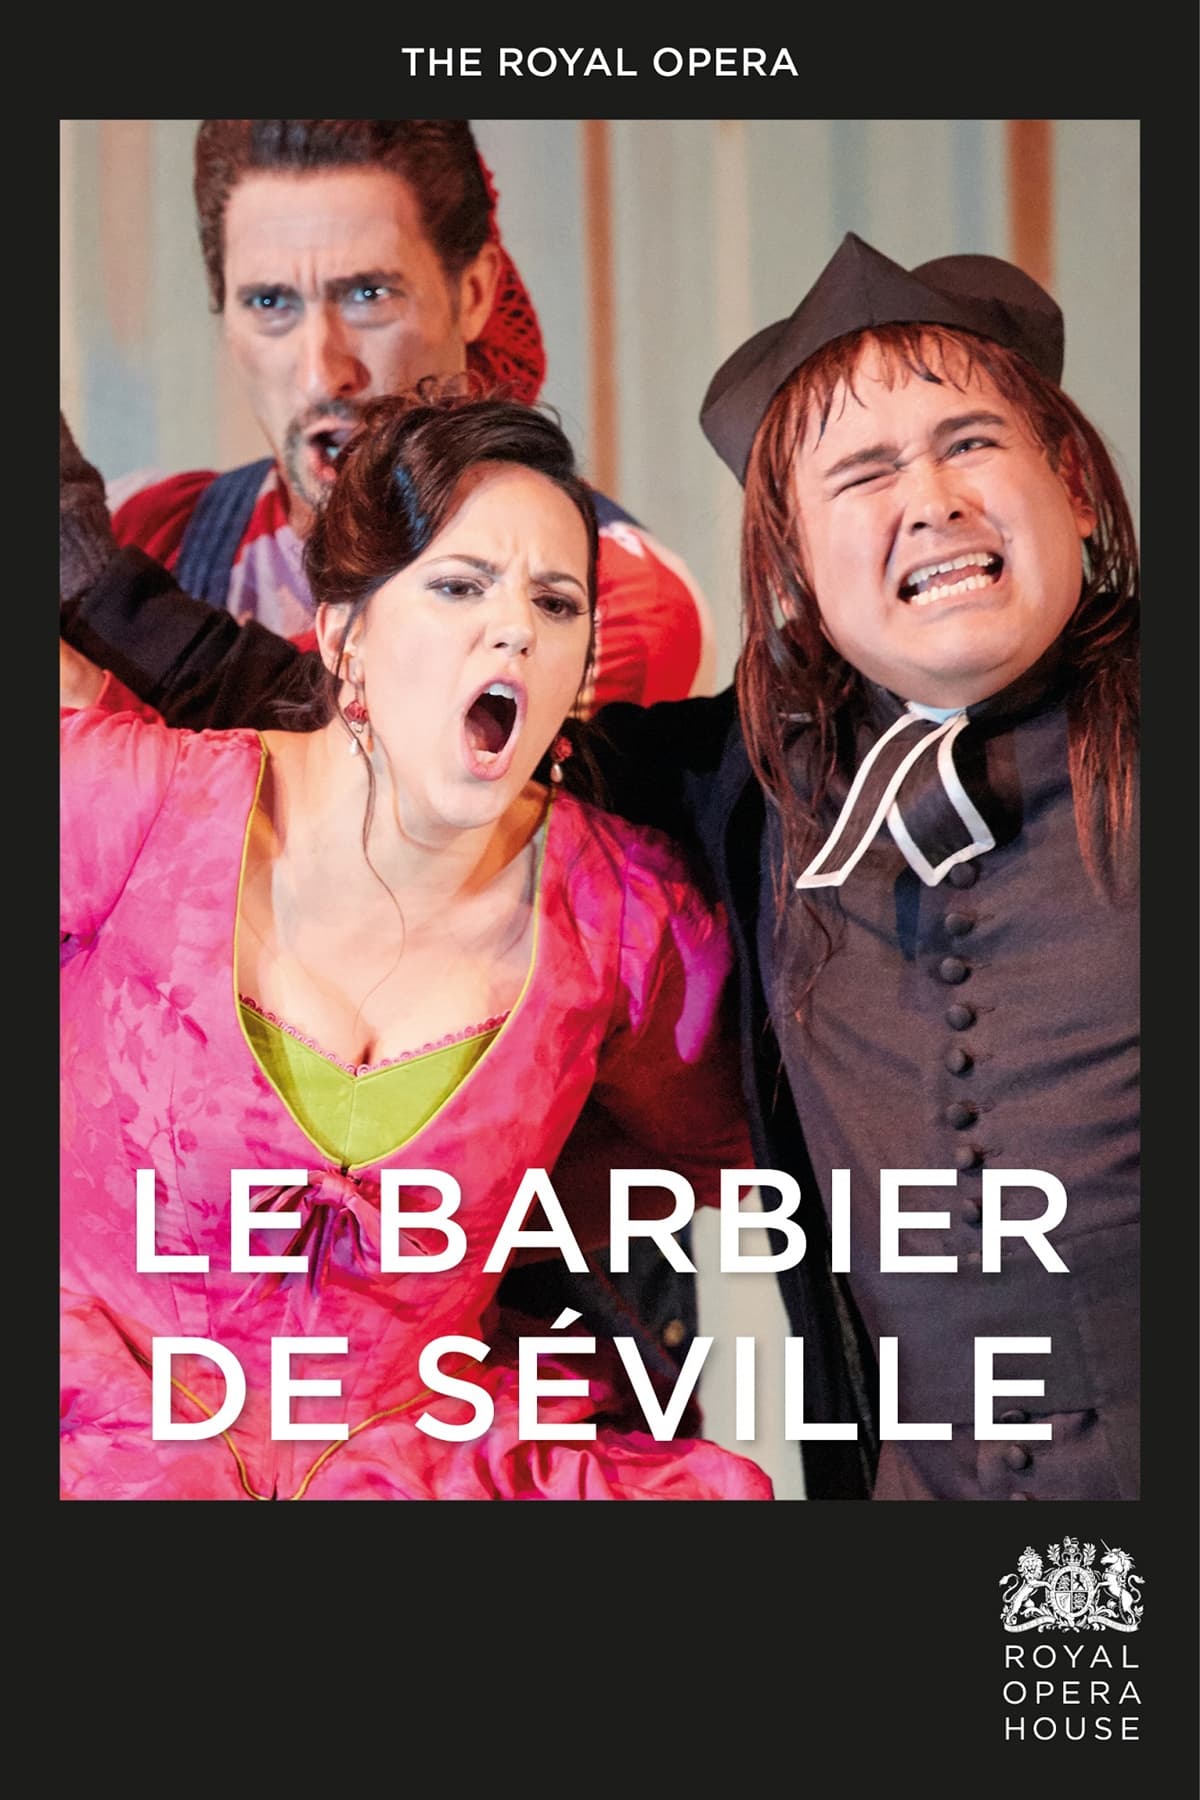 The Royal Opera House: The Barber of Seville